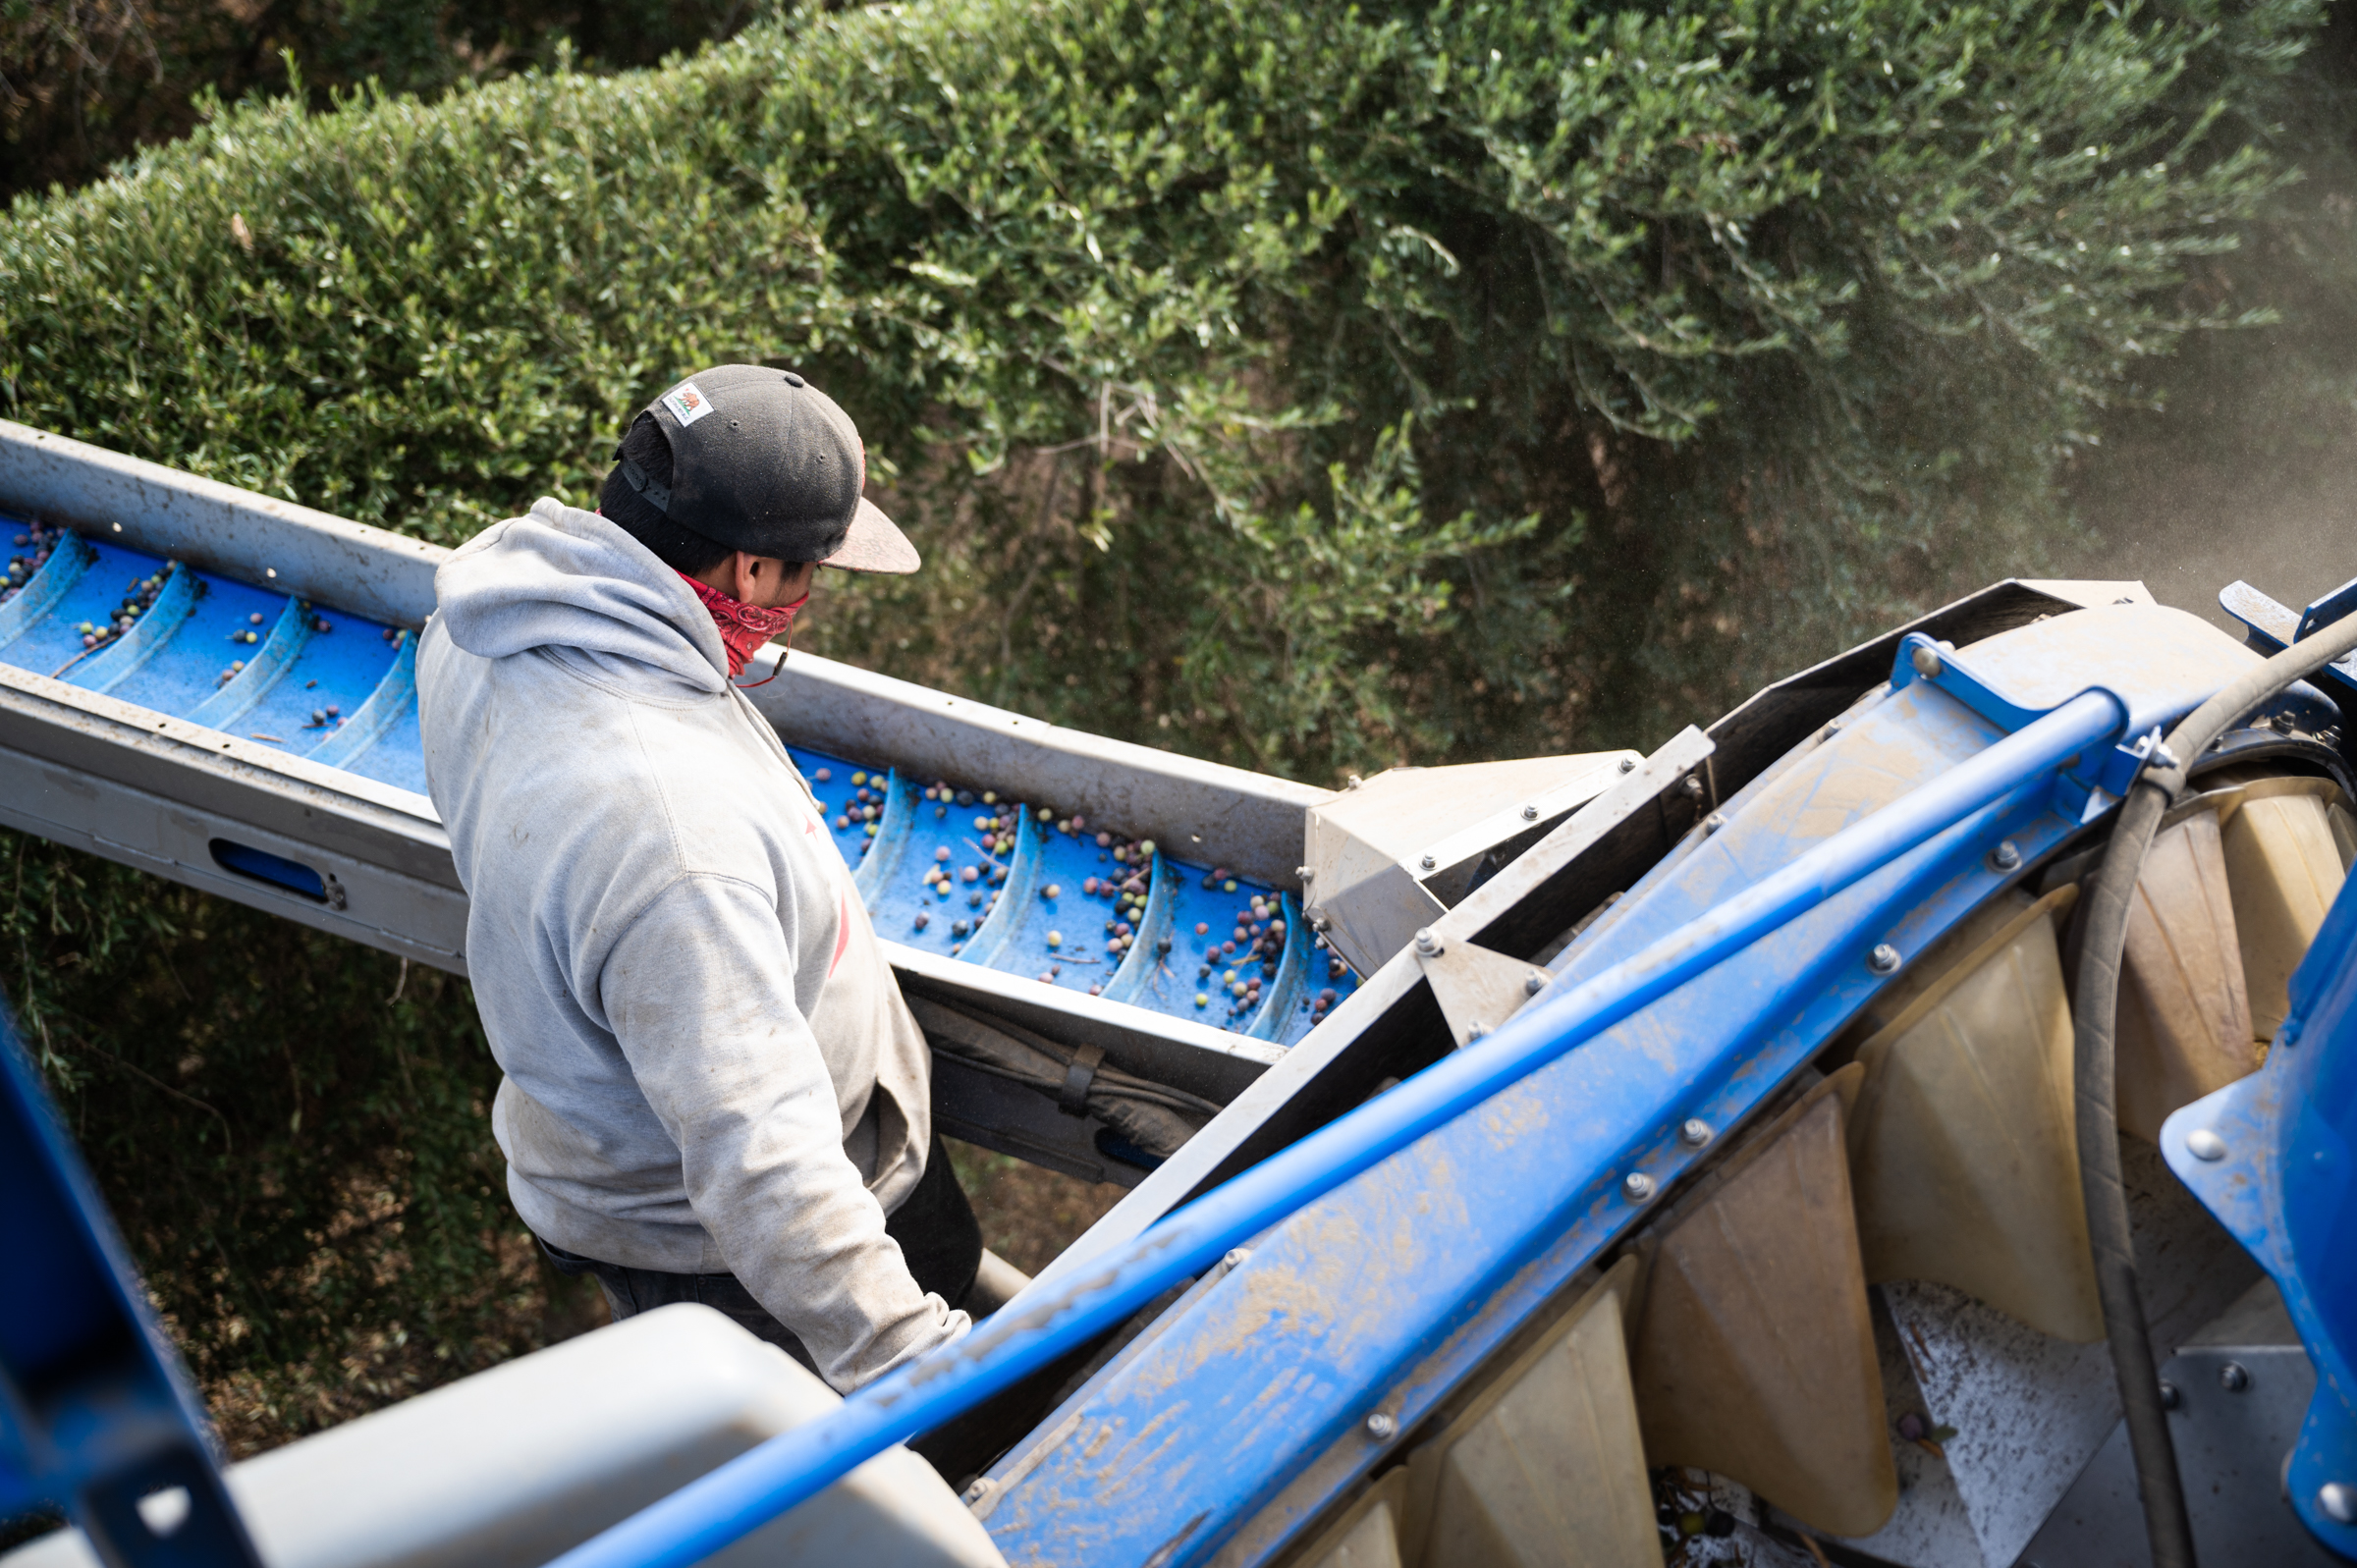 From atop the harvester, a worker clears debris from the olive conveyor